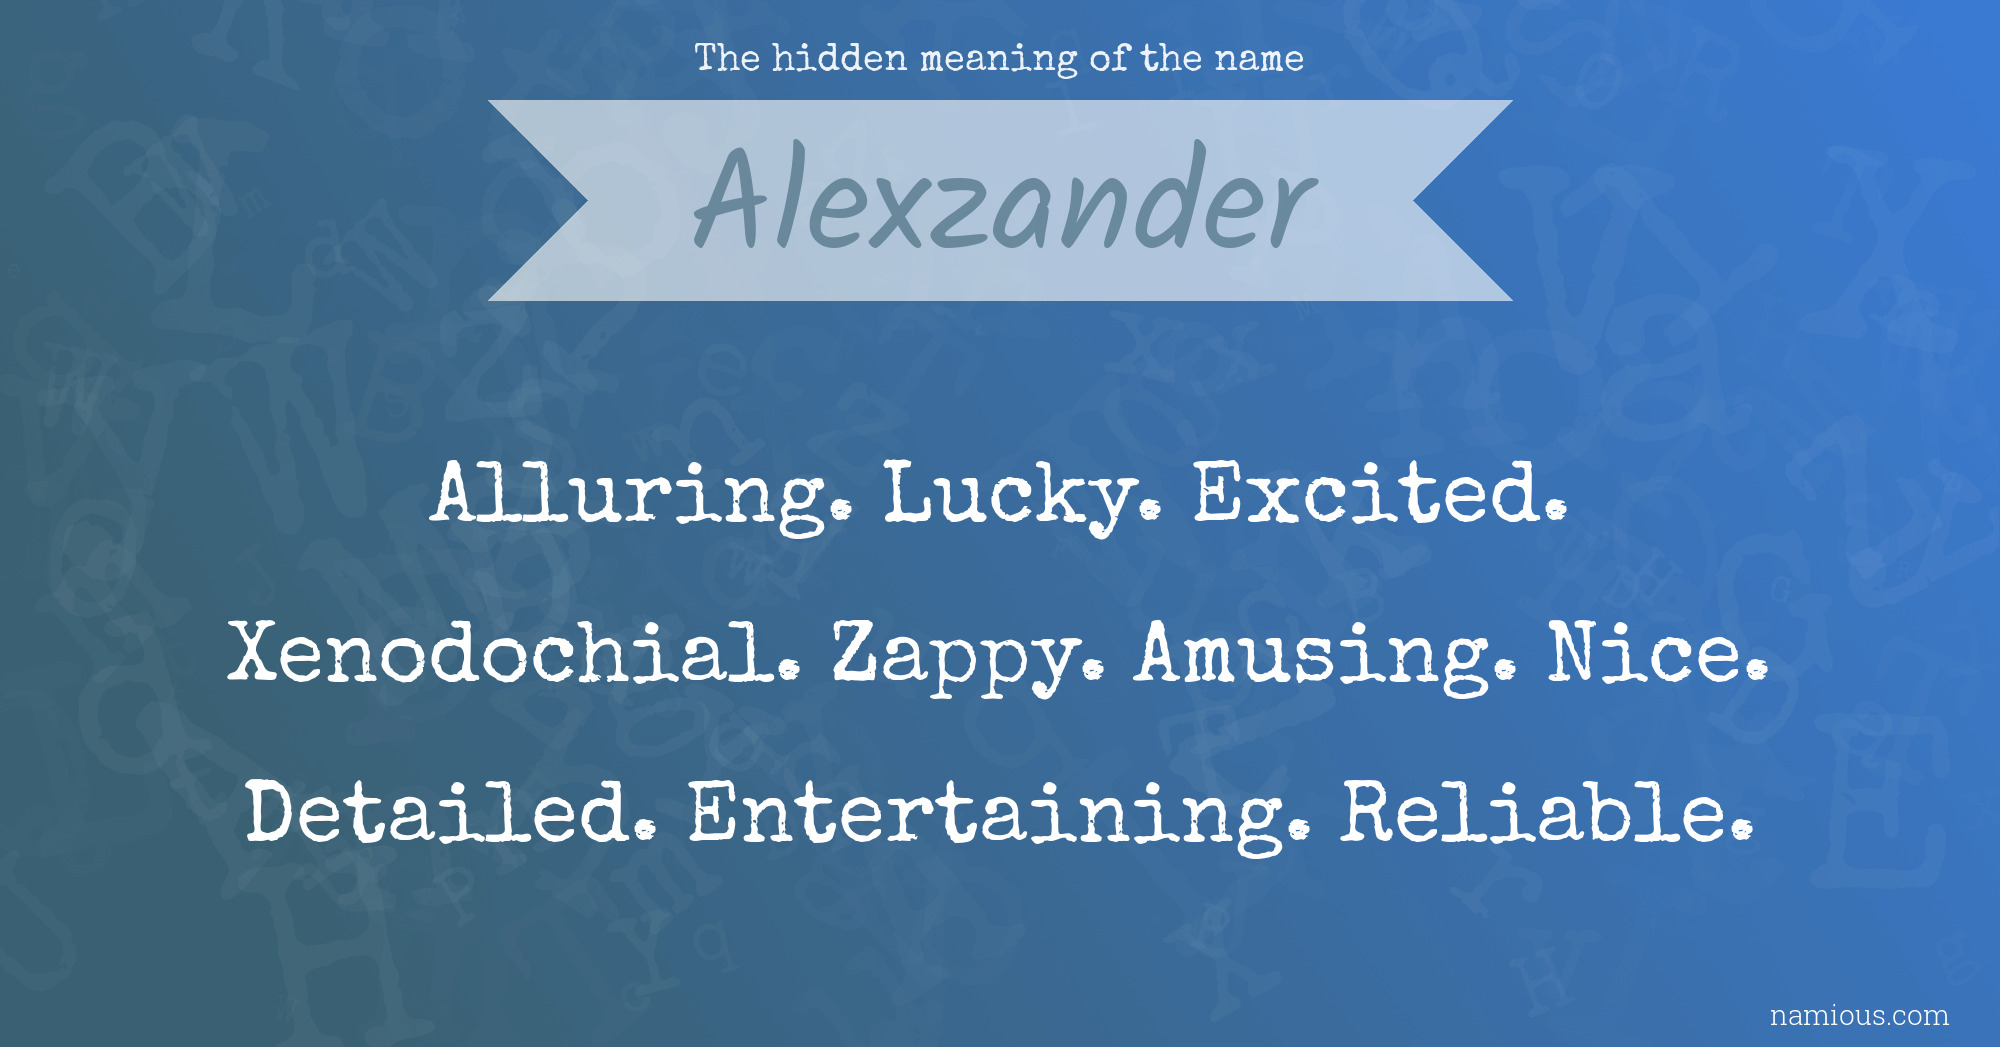 The hidden meaning of the name Alexzander